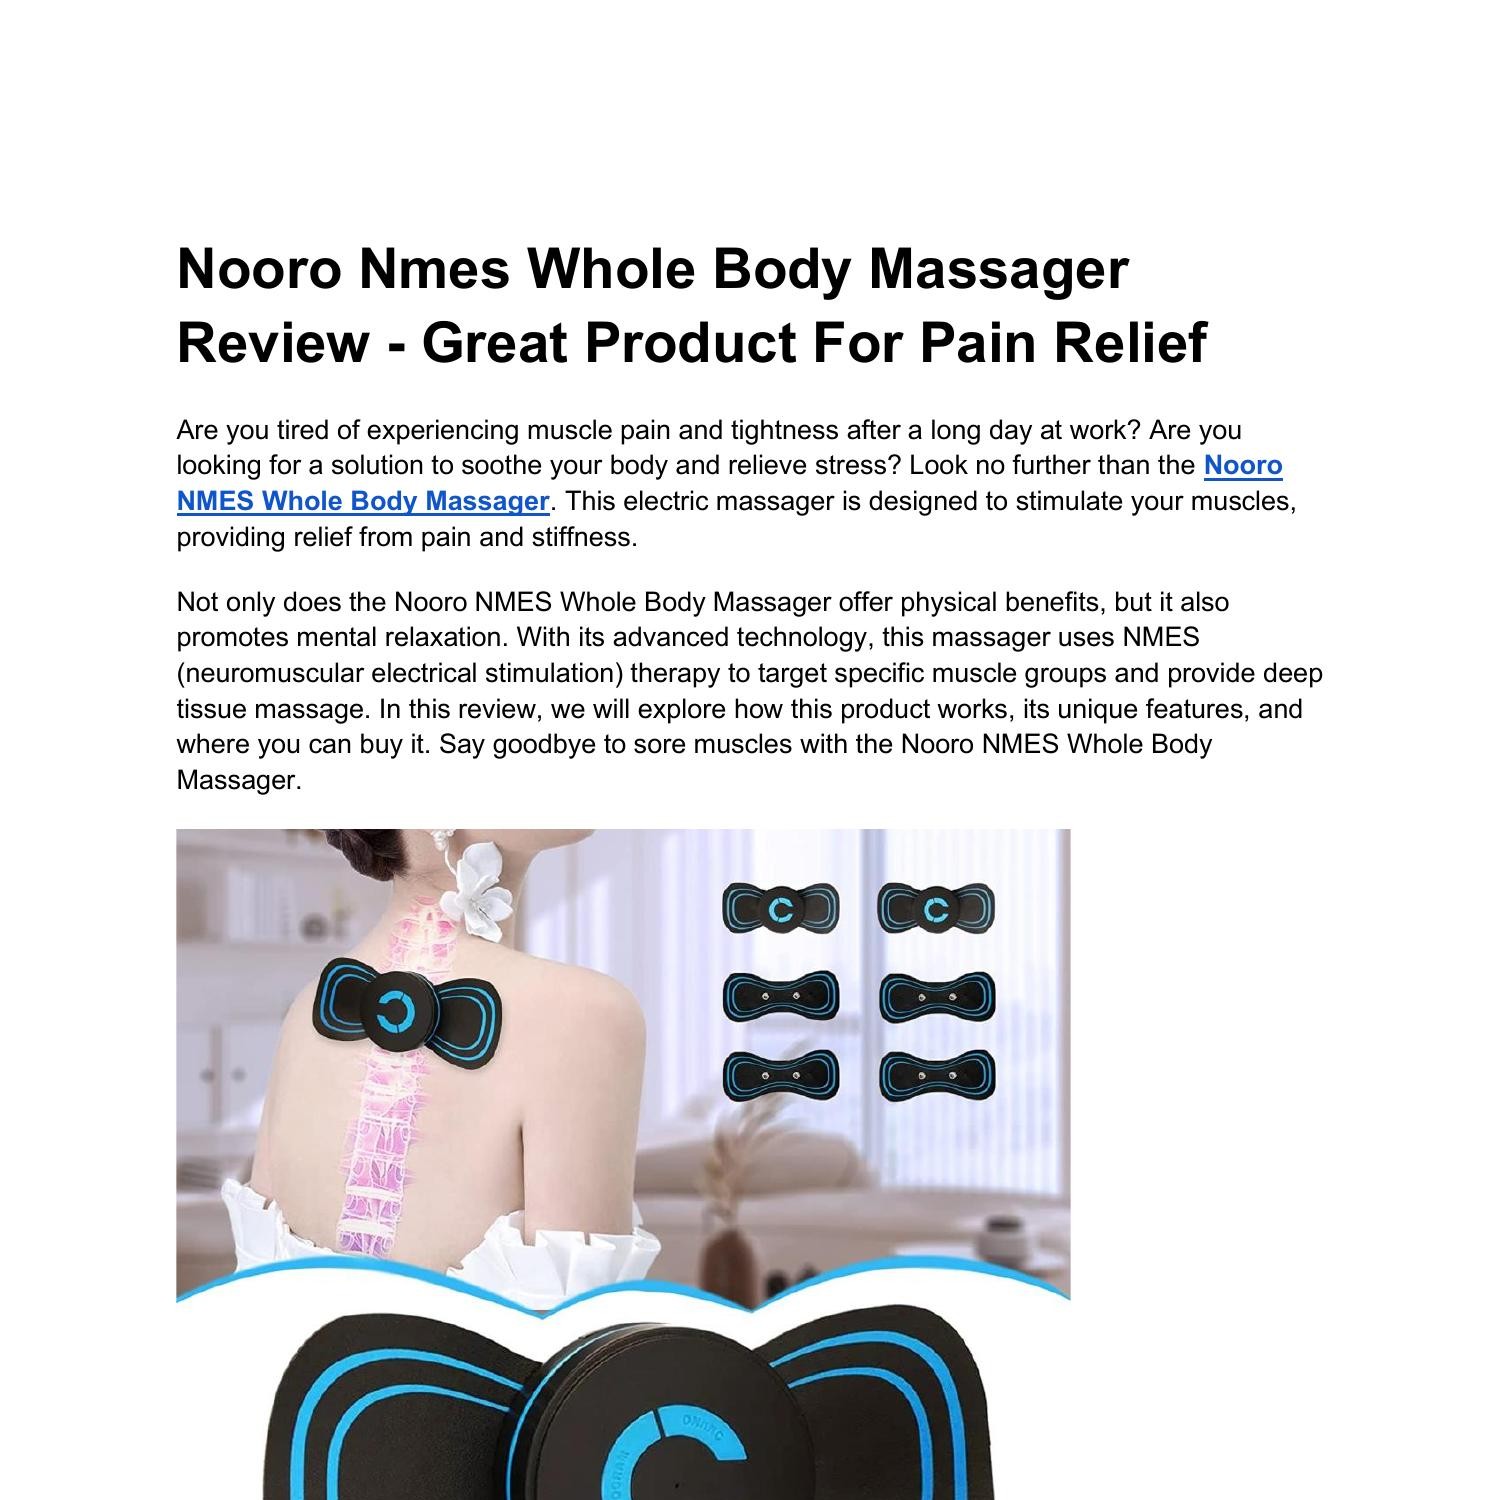 Nooro Whole Body Massager Reviews (Updated): Does Nooro Body Massager  Really Work? Read About This Nooro Body Massager Before Buying.